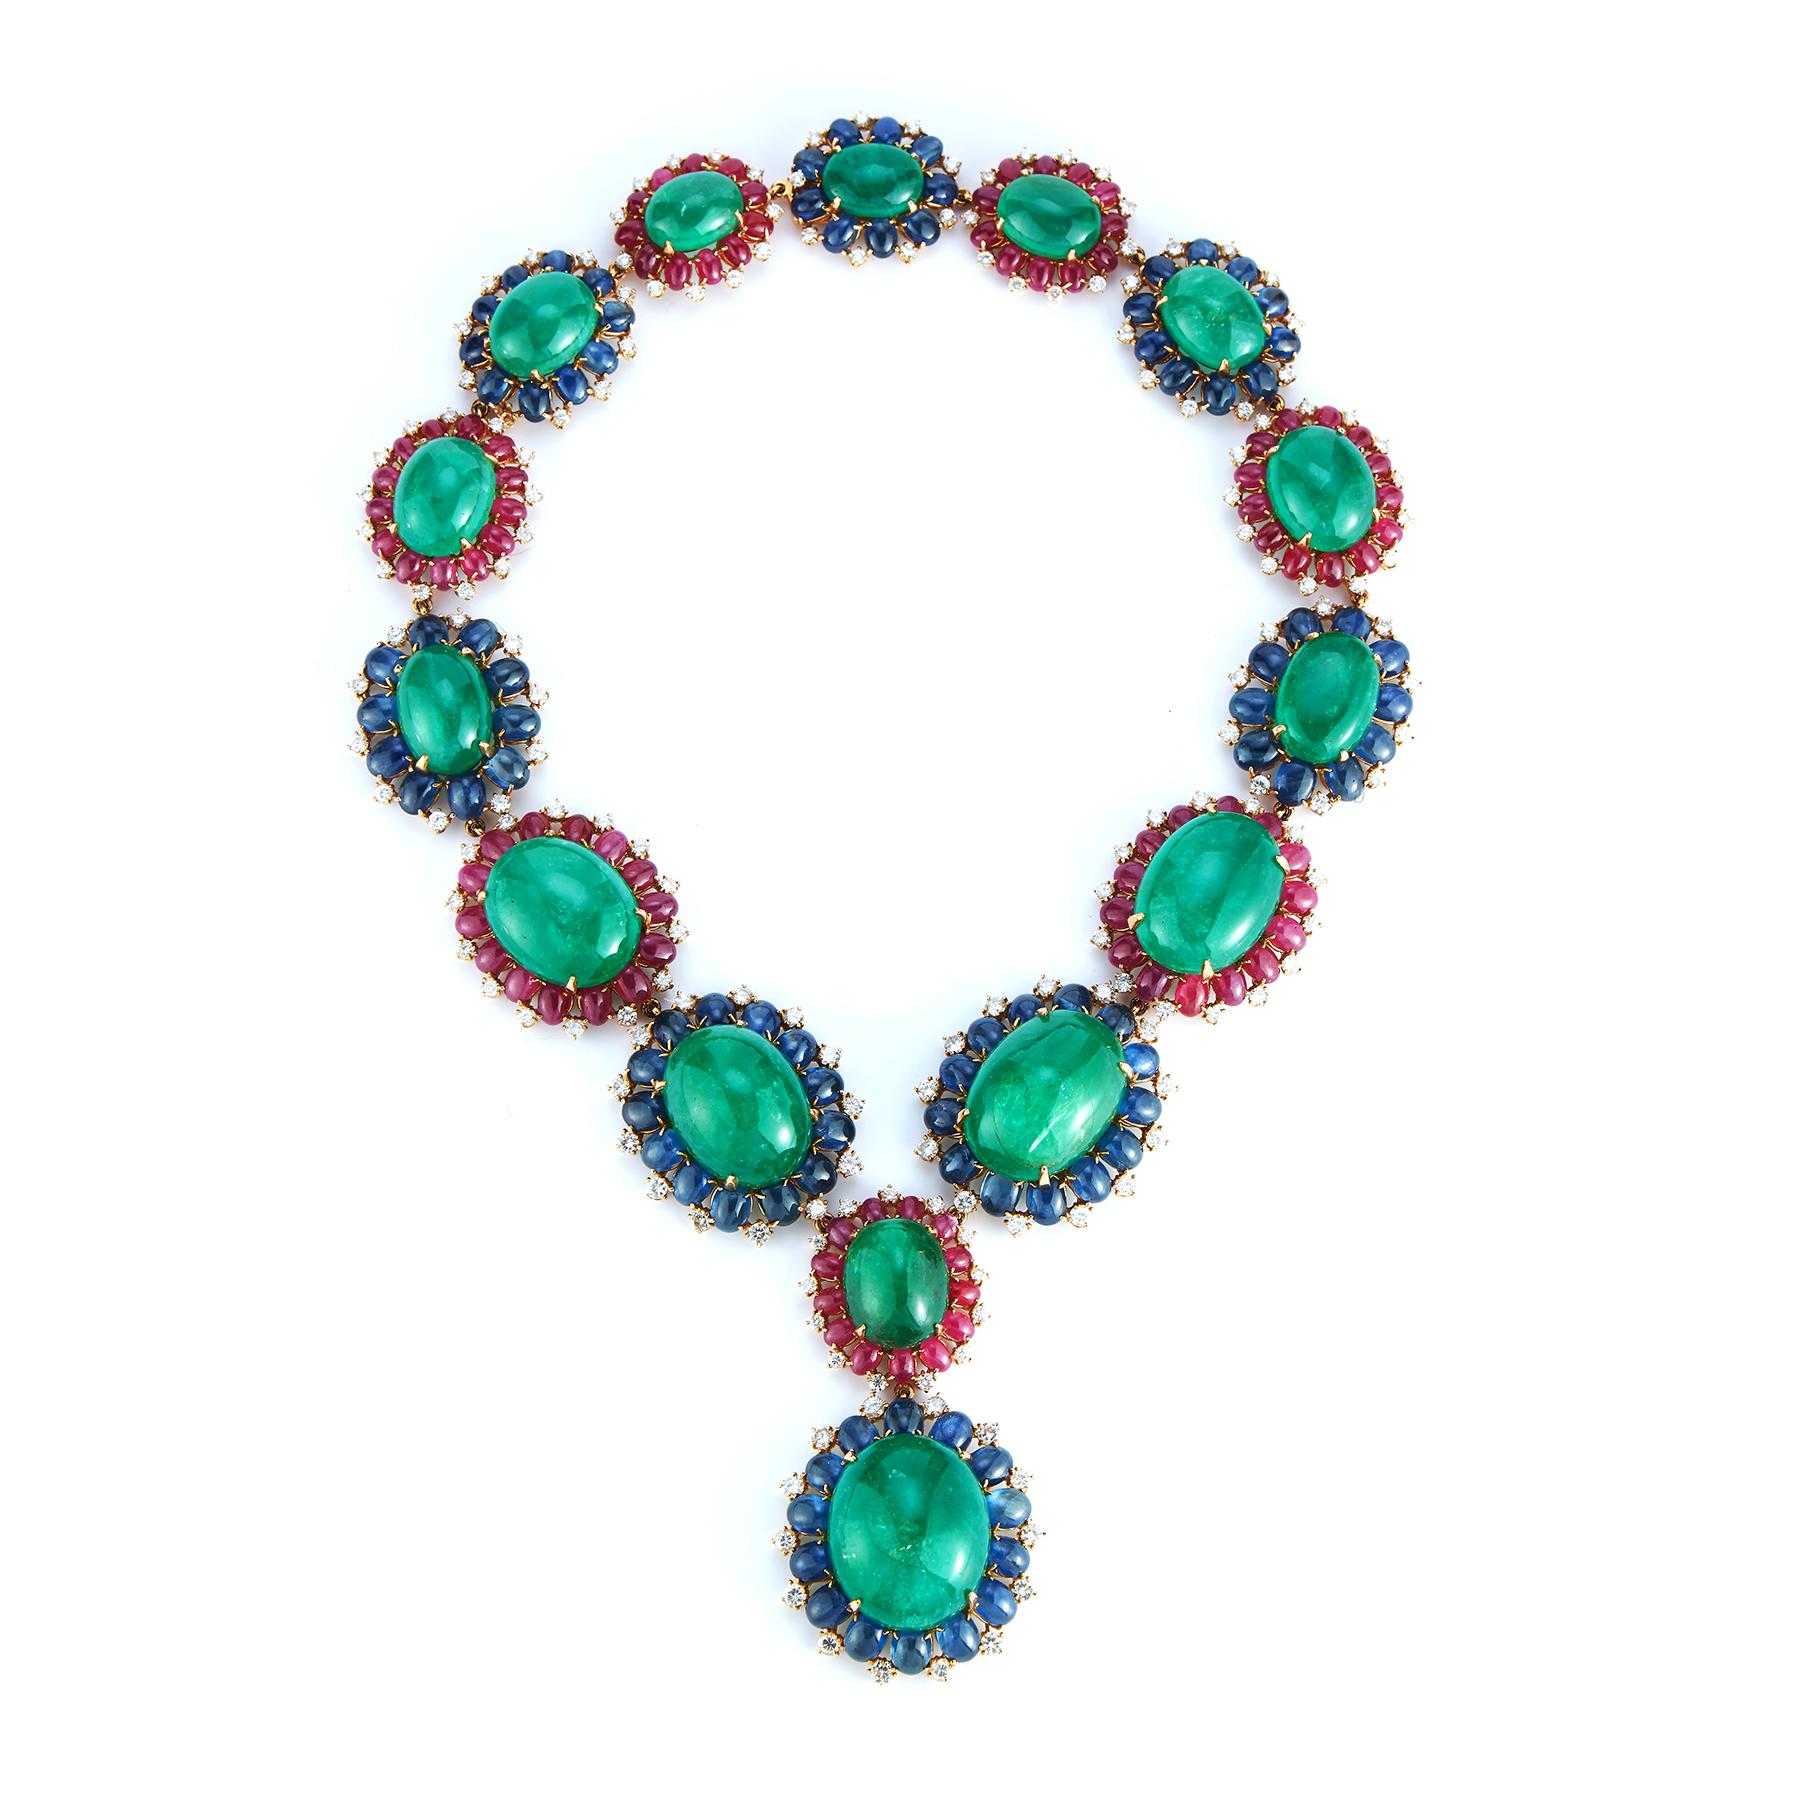 Bulgari Emerald Necklace and Earrings Set
The stunning necklace includes cabochon emeralds framed by cabochon sapphires and rubies, highlighted by round diamonds; the earclips similarly set.
Necklace length: 17¼ inches. 
Earring Length:  1 inch